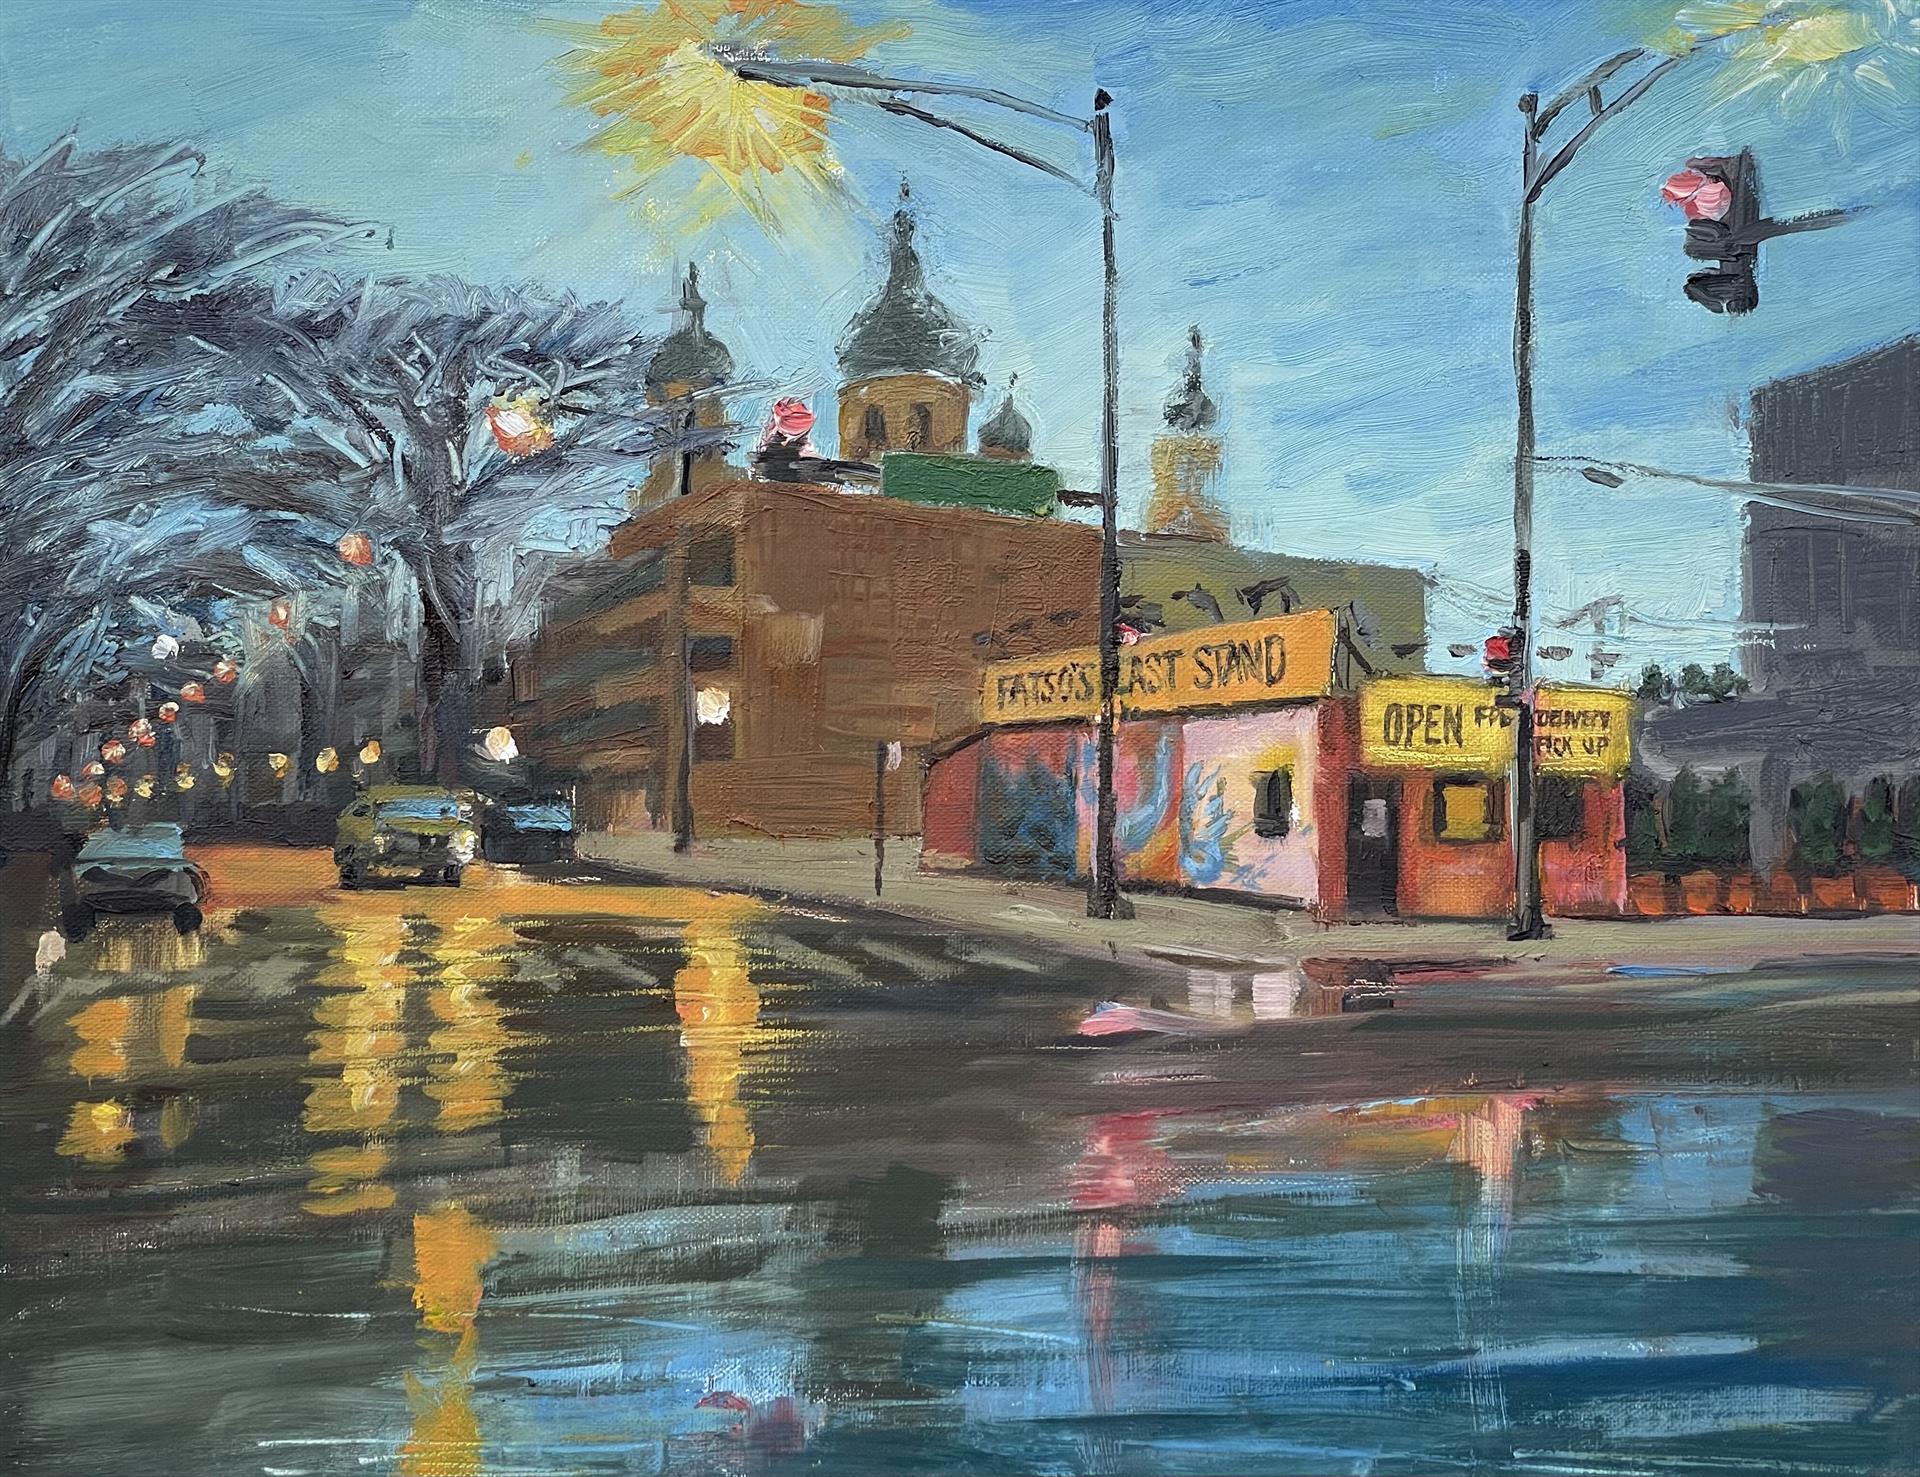 Virginia Ferrante-Iqbal — Fatso's Last Stand, Chicago Ave in West Town